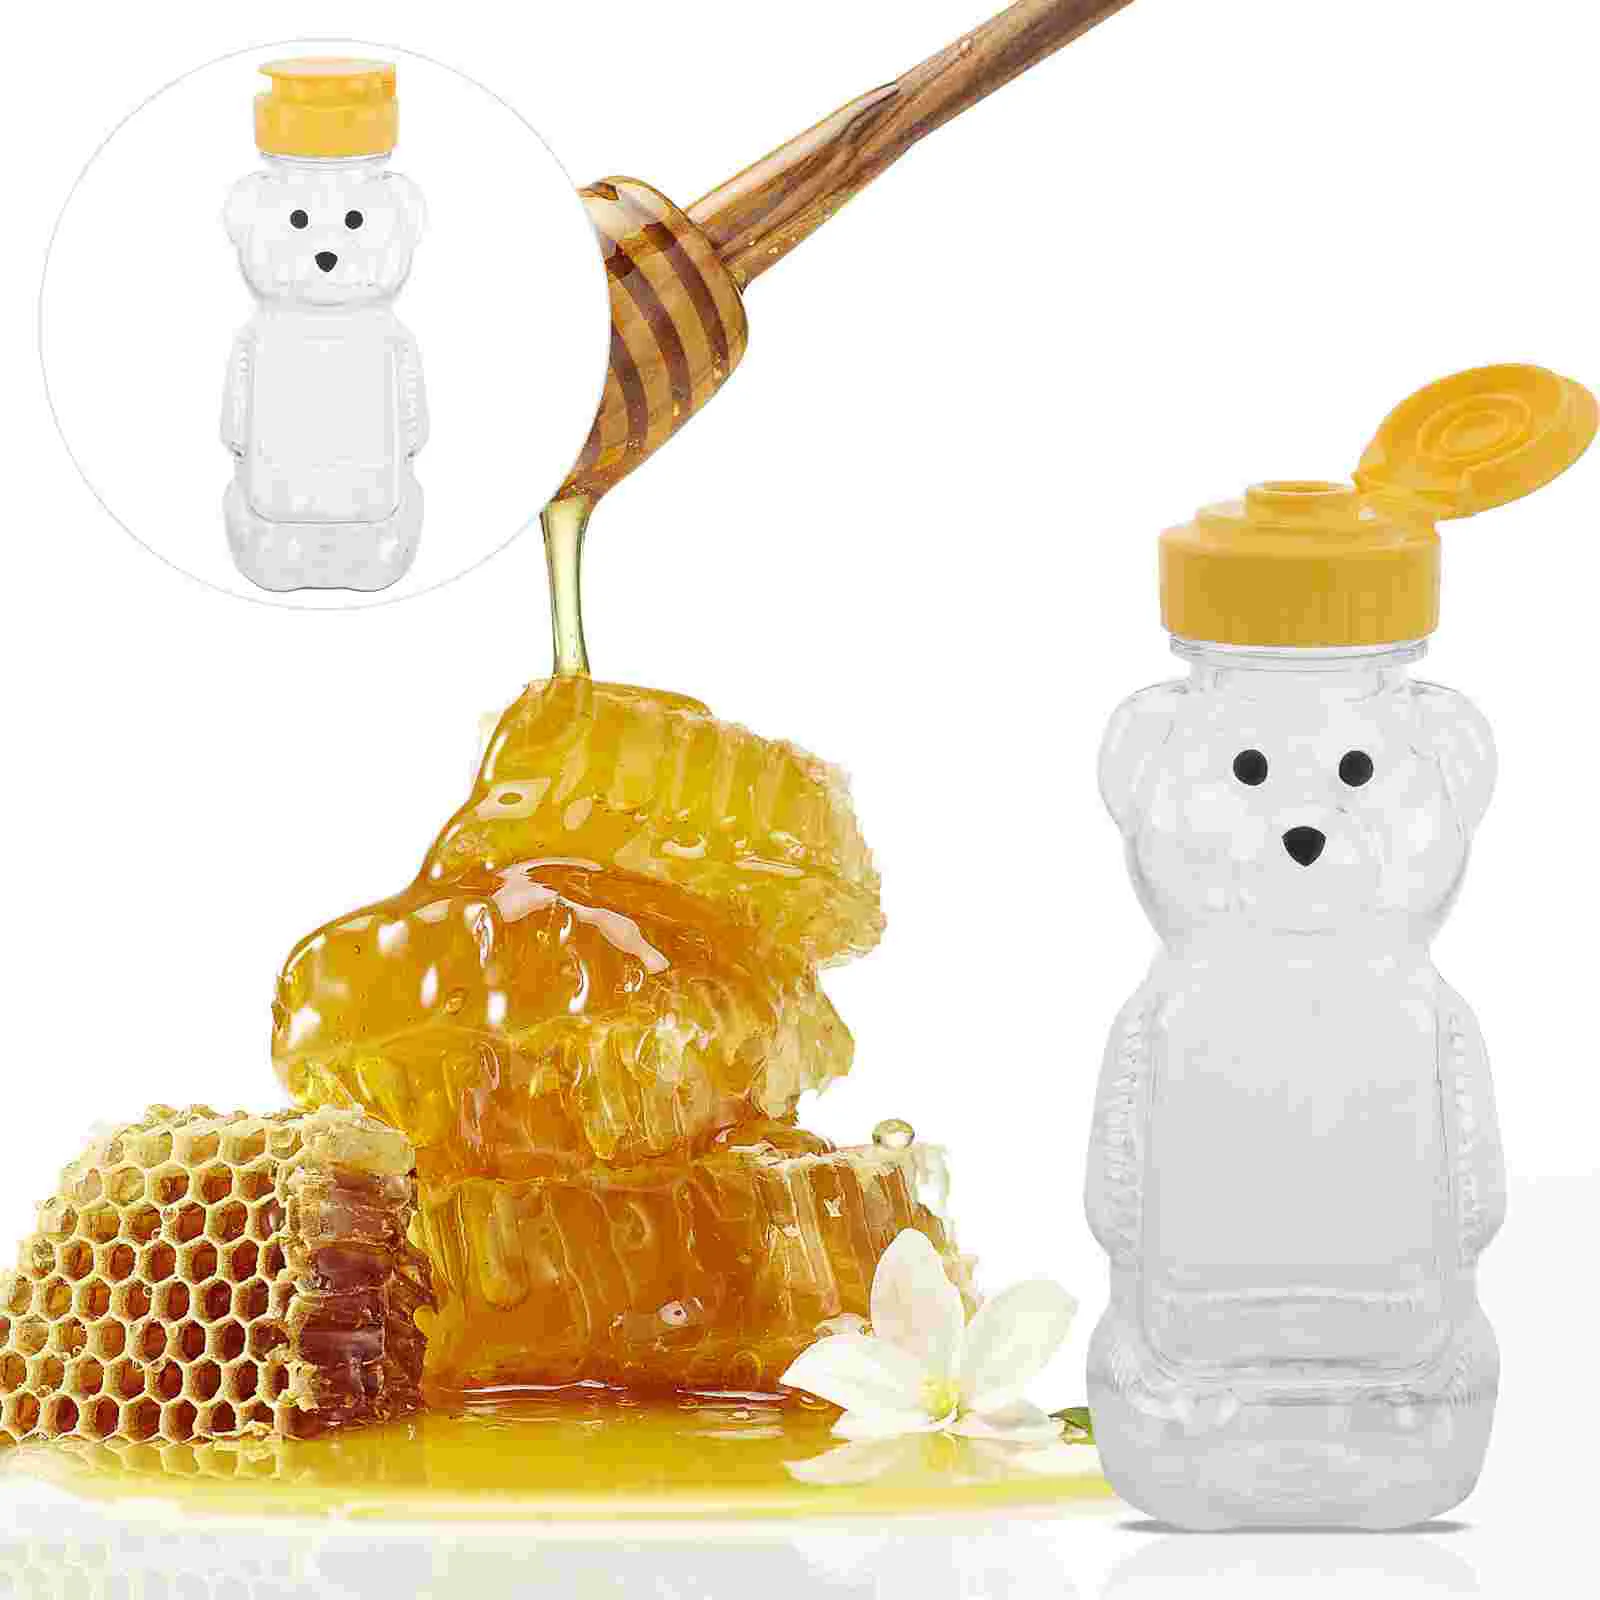 

12 Pcs Sippy Bottles Squeeze Honey Ketchup Drink Container Jar Coffe Syrup Sauce Containers Condiment Dispenser Plastic Cruet